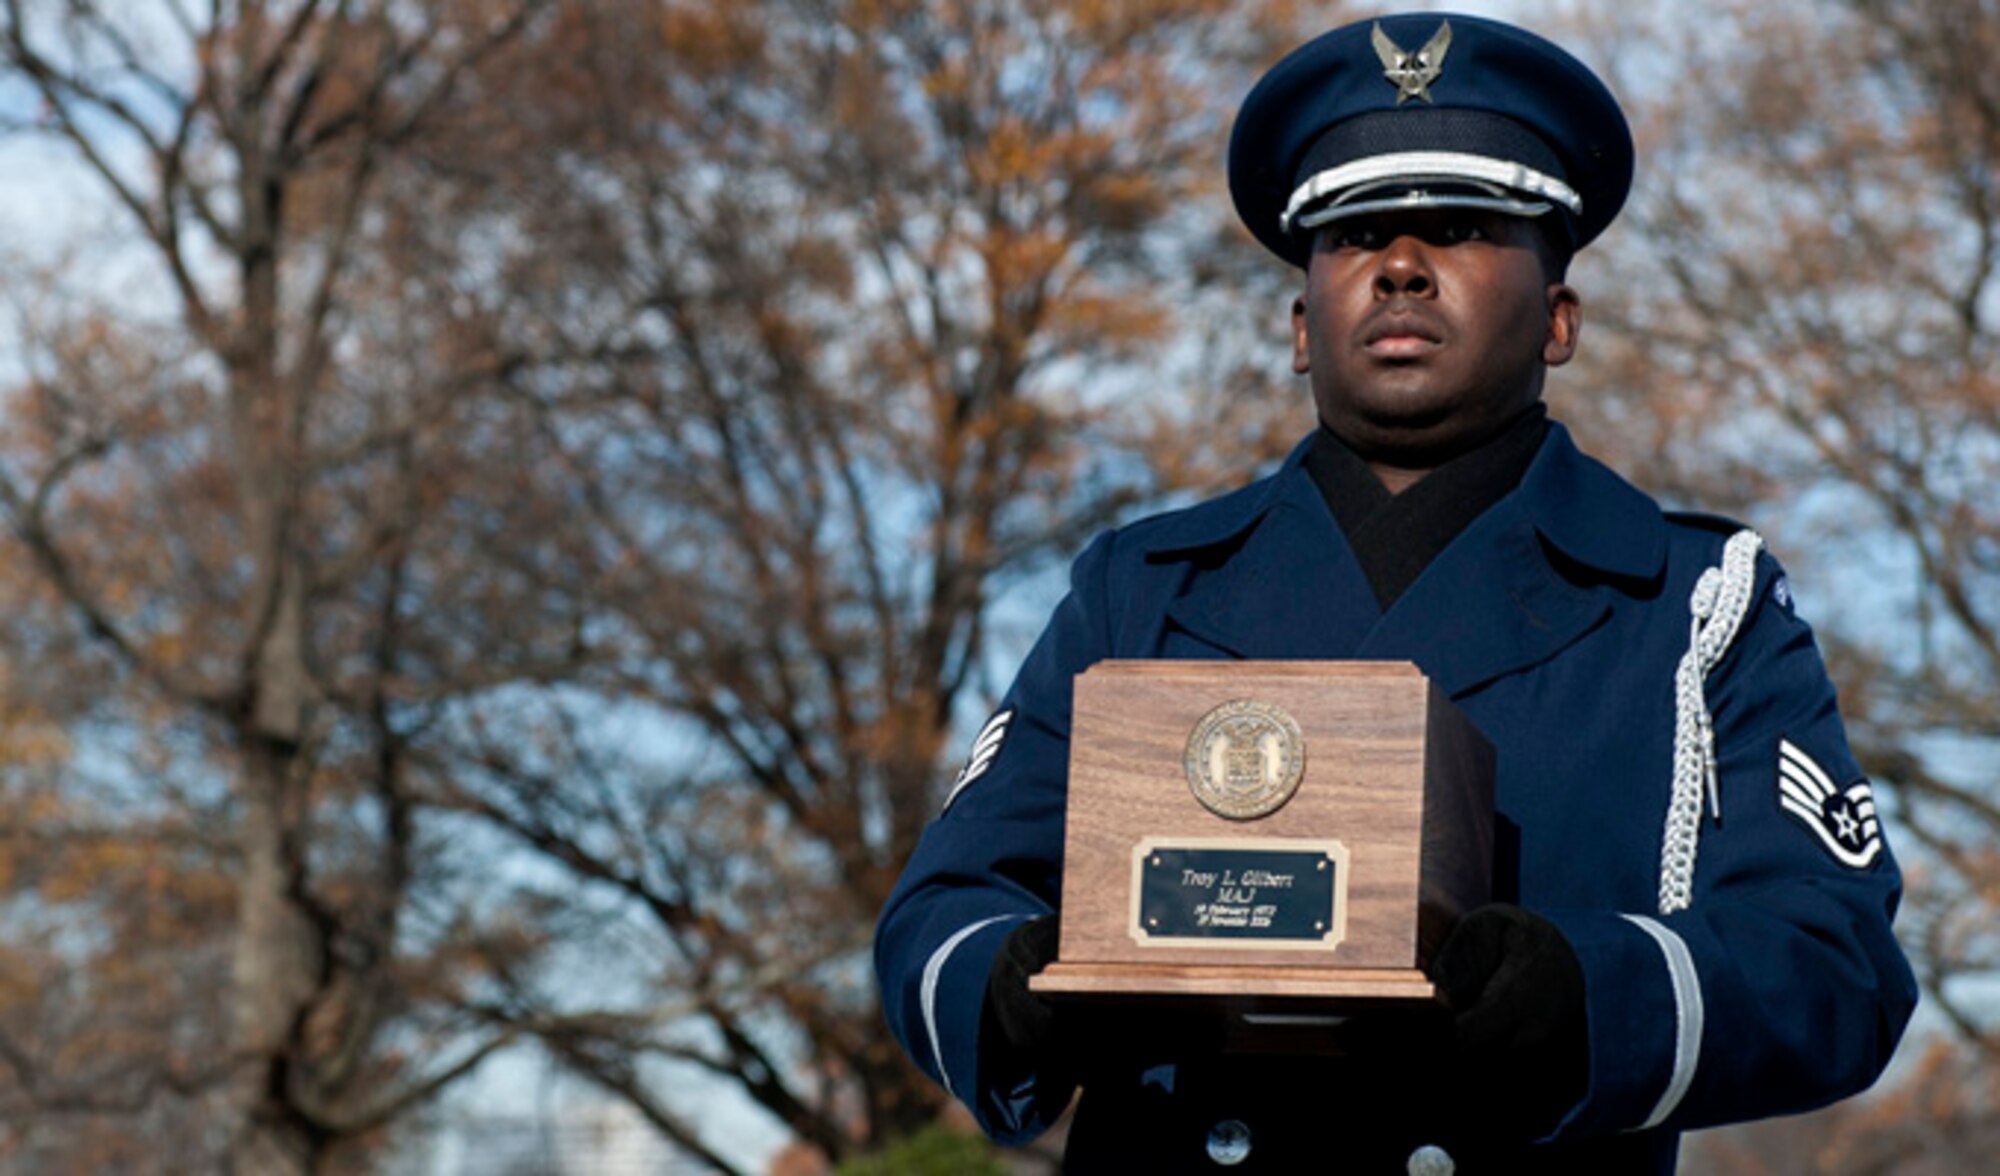 A member of the U. S. Air Force Honor Guard carries the recently recovered remains of Maj. Troy Gilbert, during a remembrance funeral Dec. 11, 2013, at Arlington Cemetery, Va. Gilbert's remains have been interred seven years after his first military burial. (U.S. Air Force photo/Staff Sgt. Carlin Leslie)